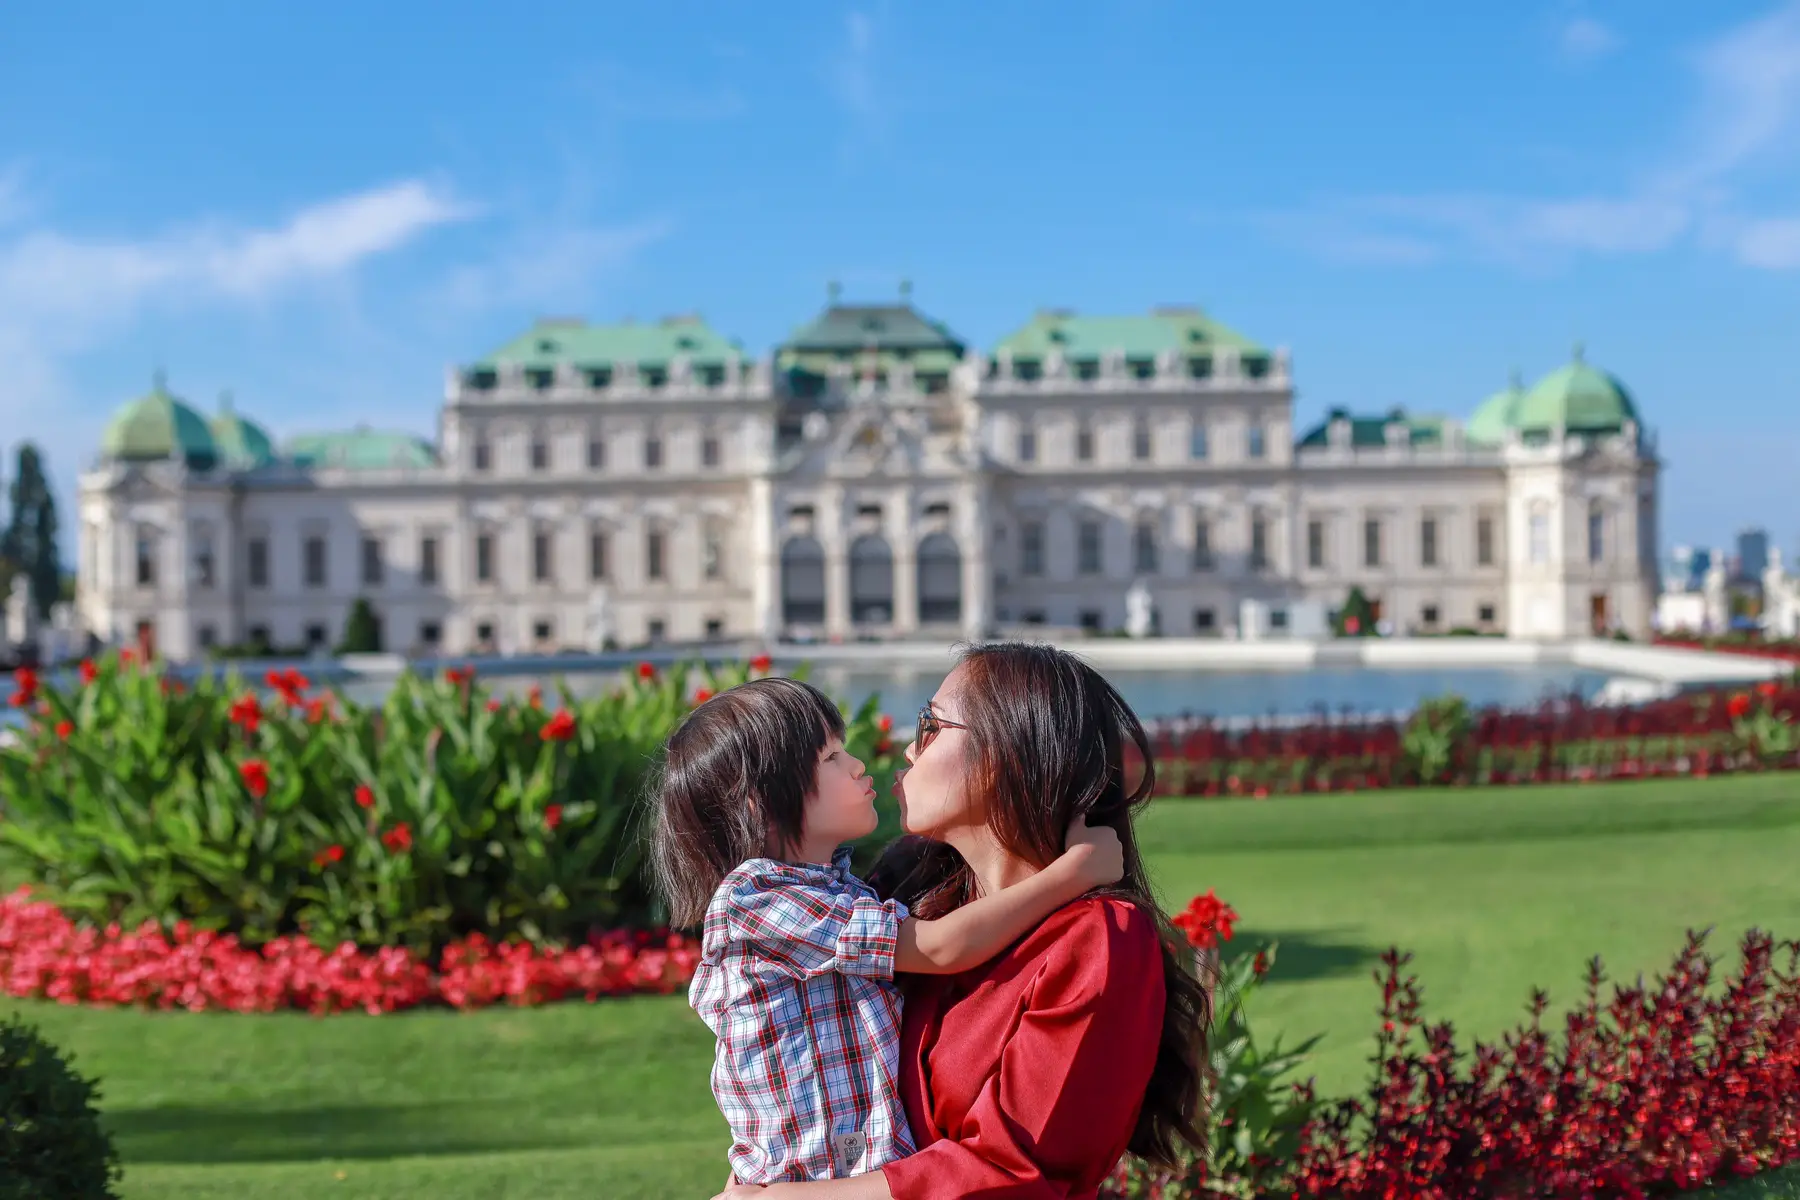 A family visiting Belvedere Palace in Vienna